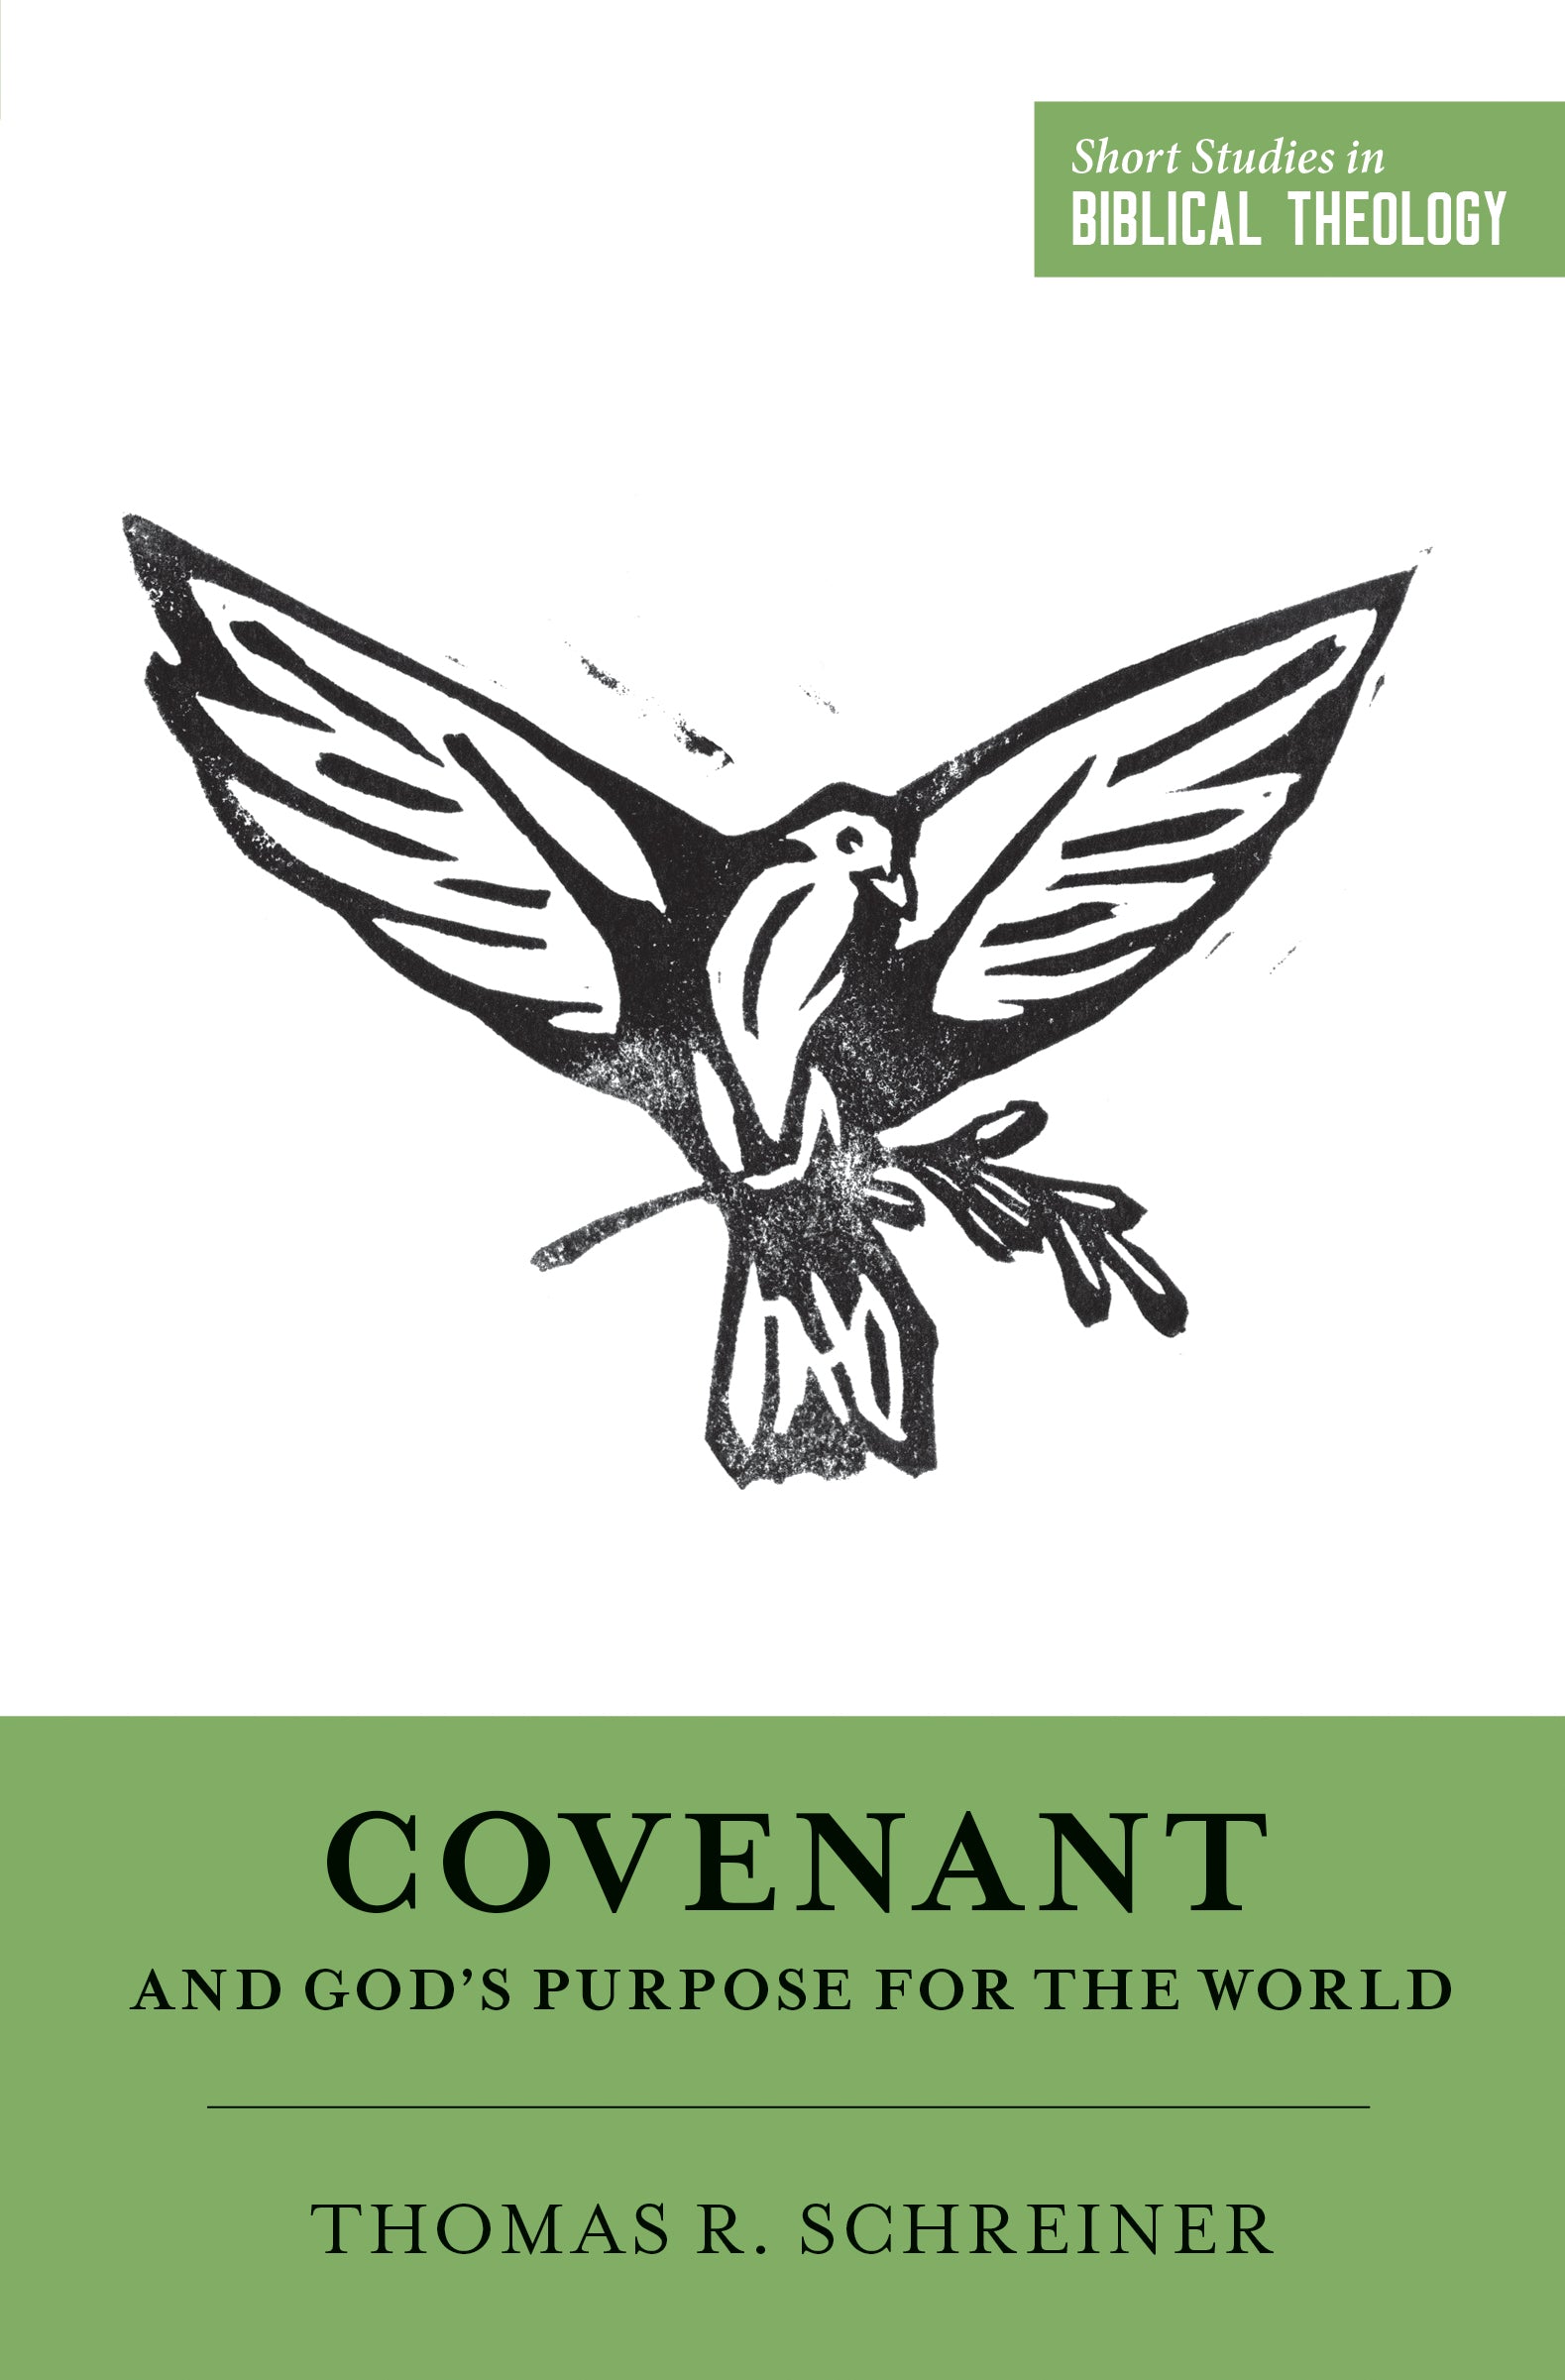 Image of Covenant and God's Purpose For The World other